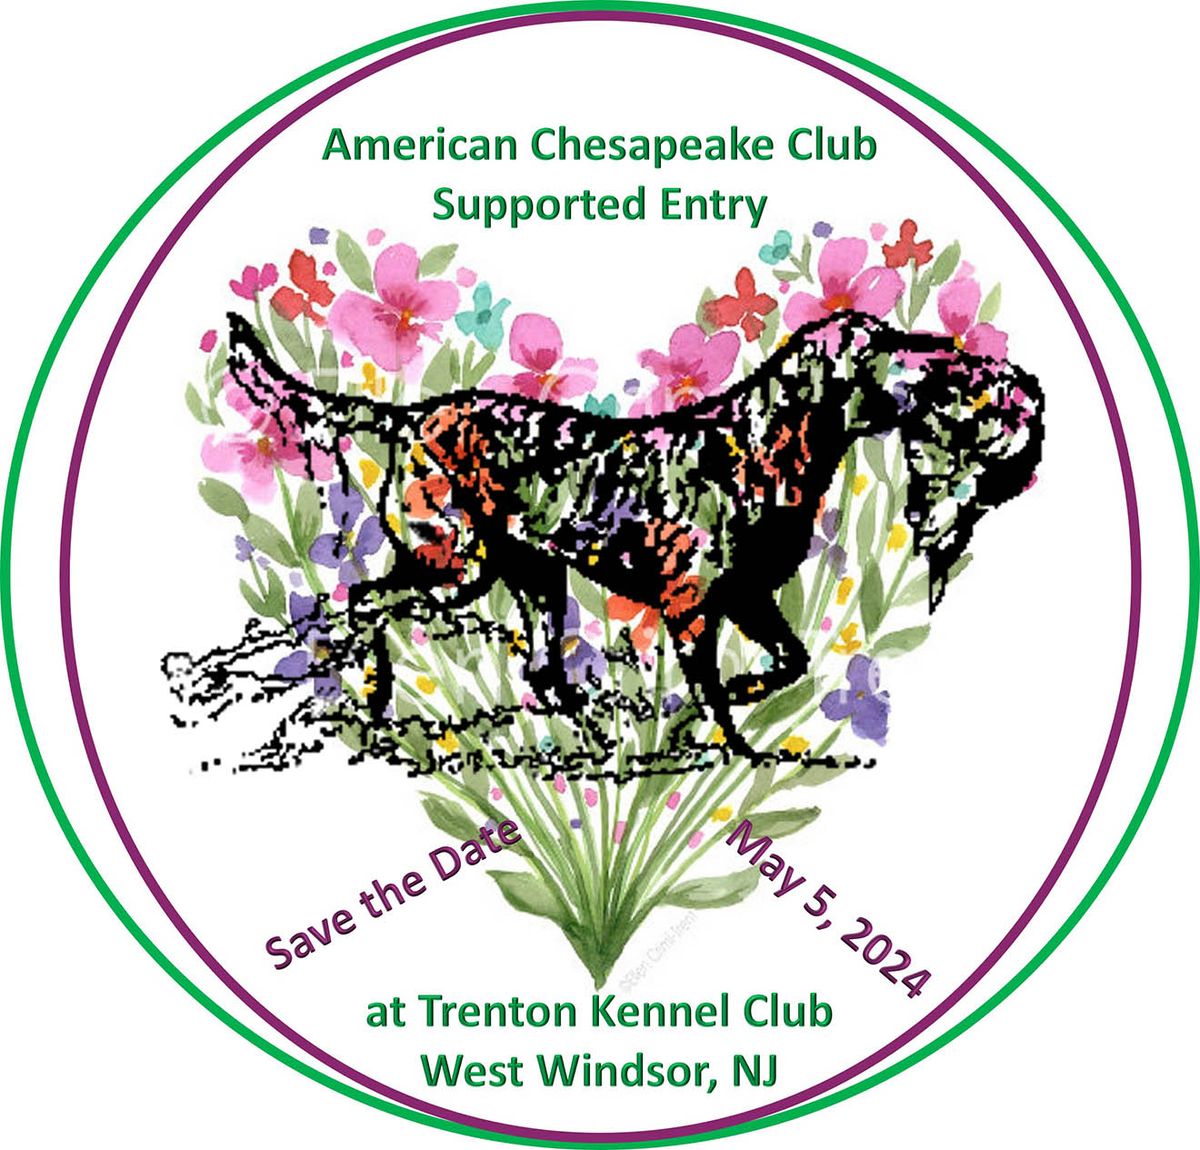 ACC Supported Entry at Trenton Kennel Club